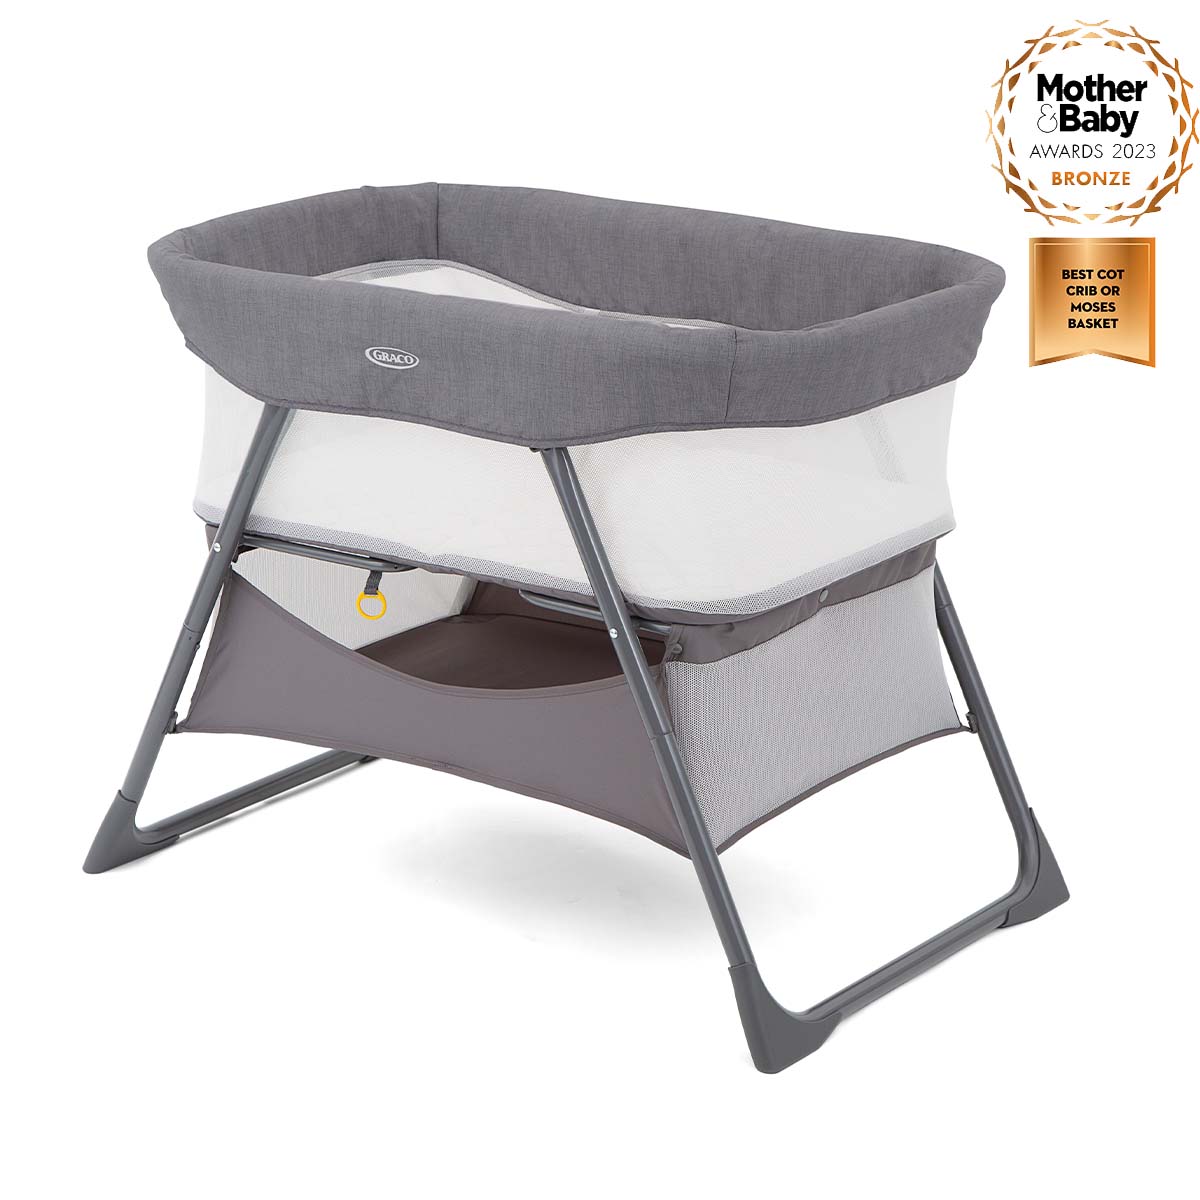 Gray Graco Side-By-Side bedside crib three quarter angle on white background with 2023 Mother & Baby bronze award